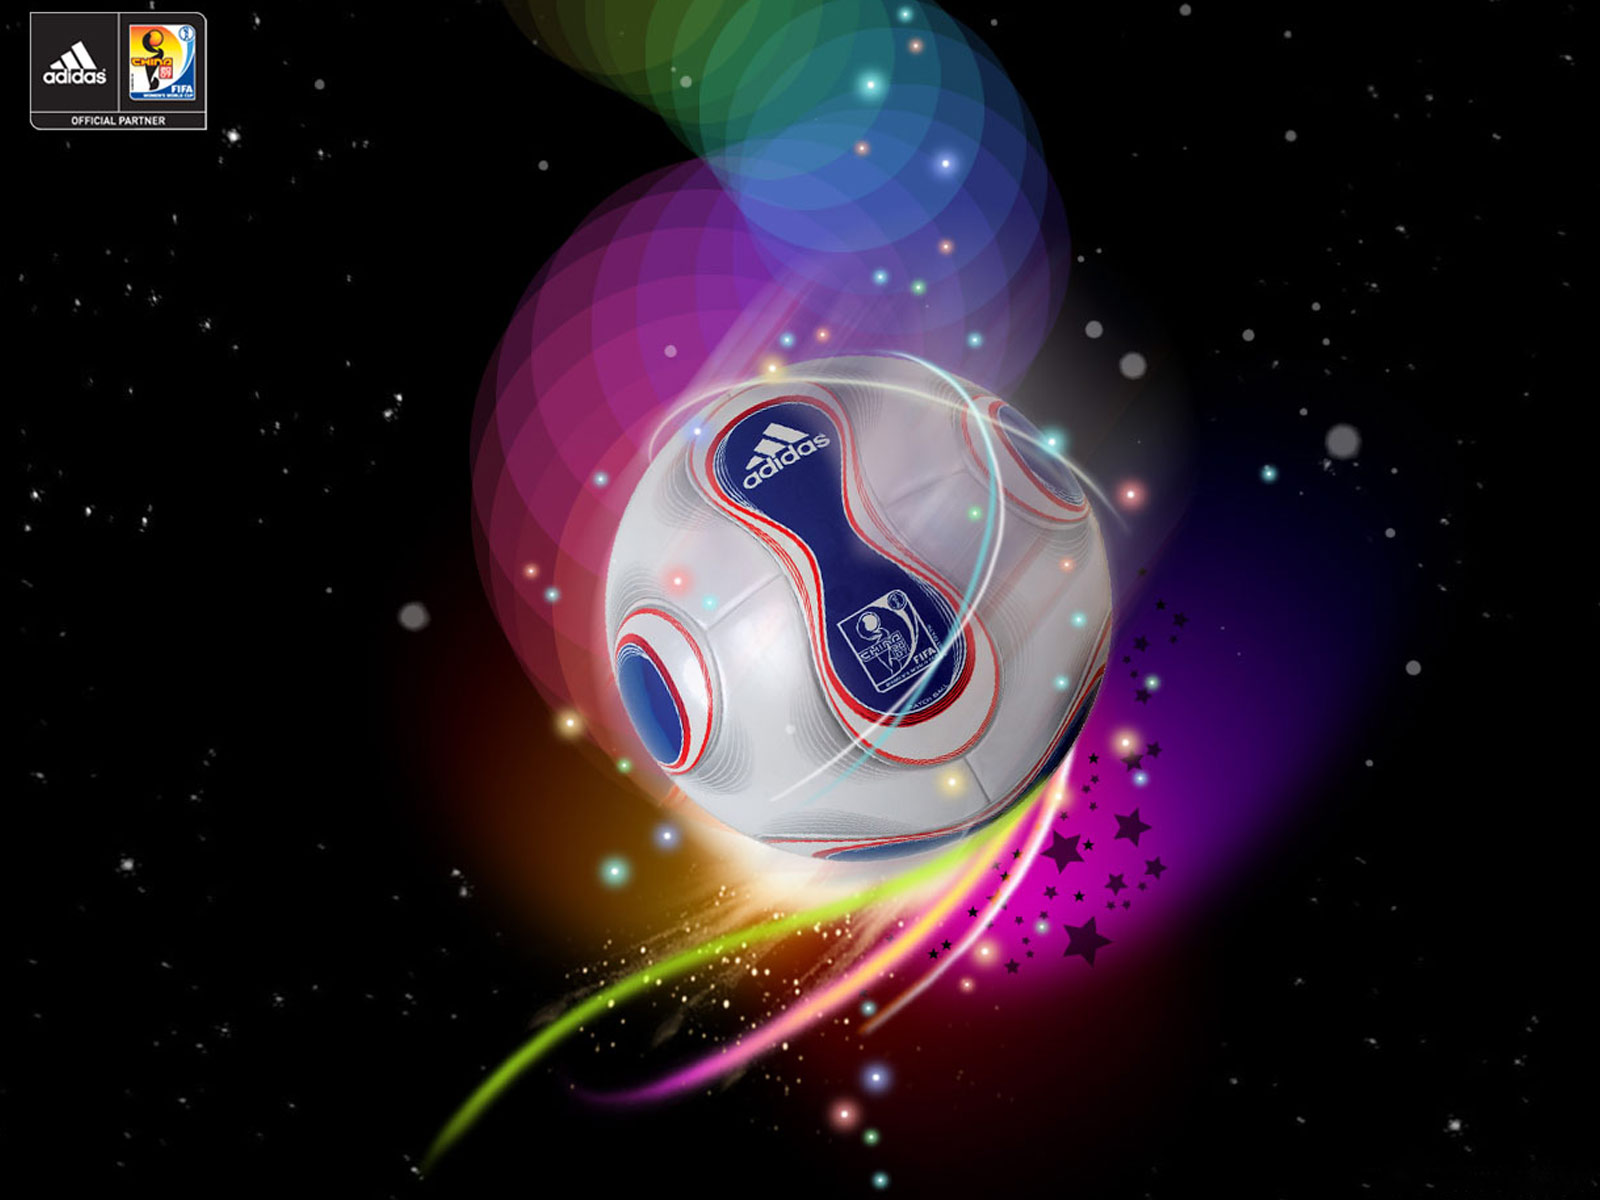 Home » worl Cup Wallpaper » FIFA World Cup 2010 Wallpapers